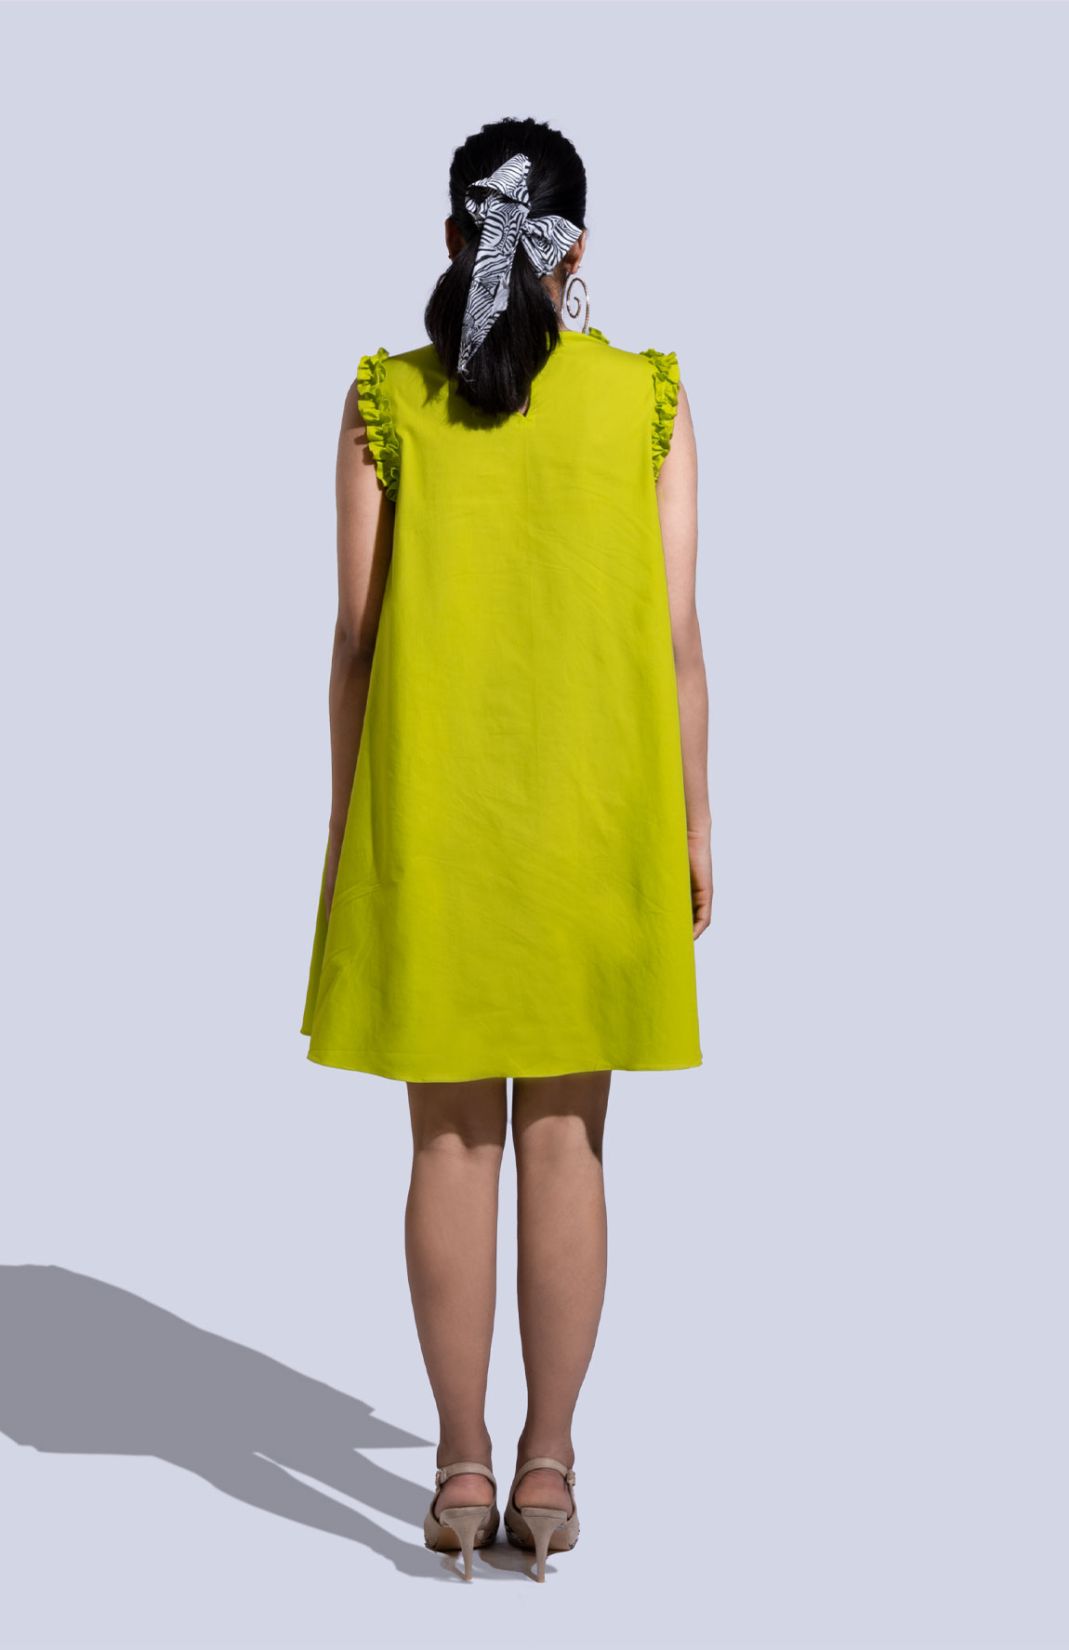 The Lime Green Dress